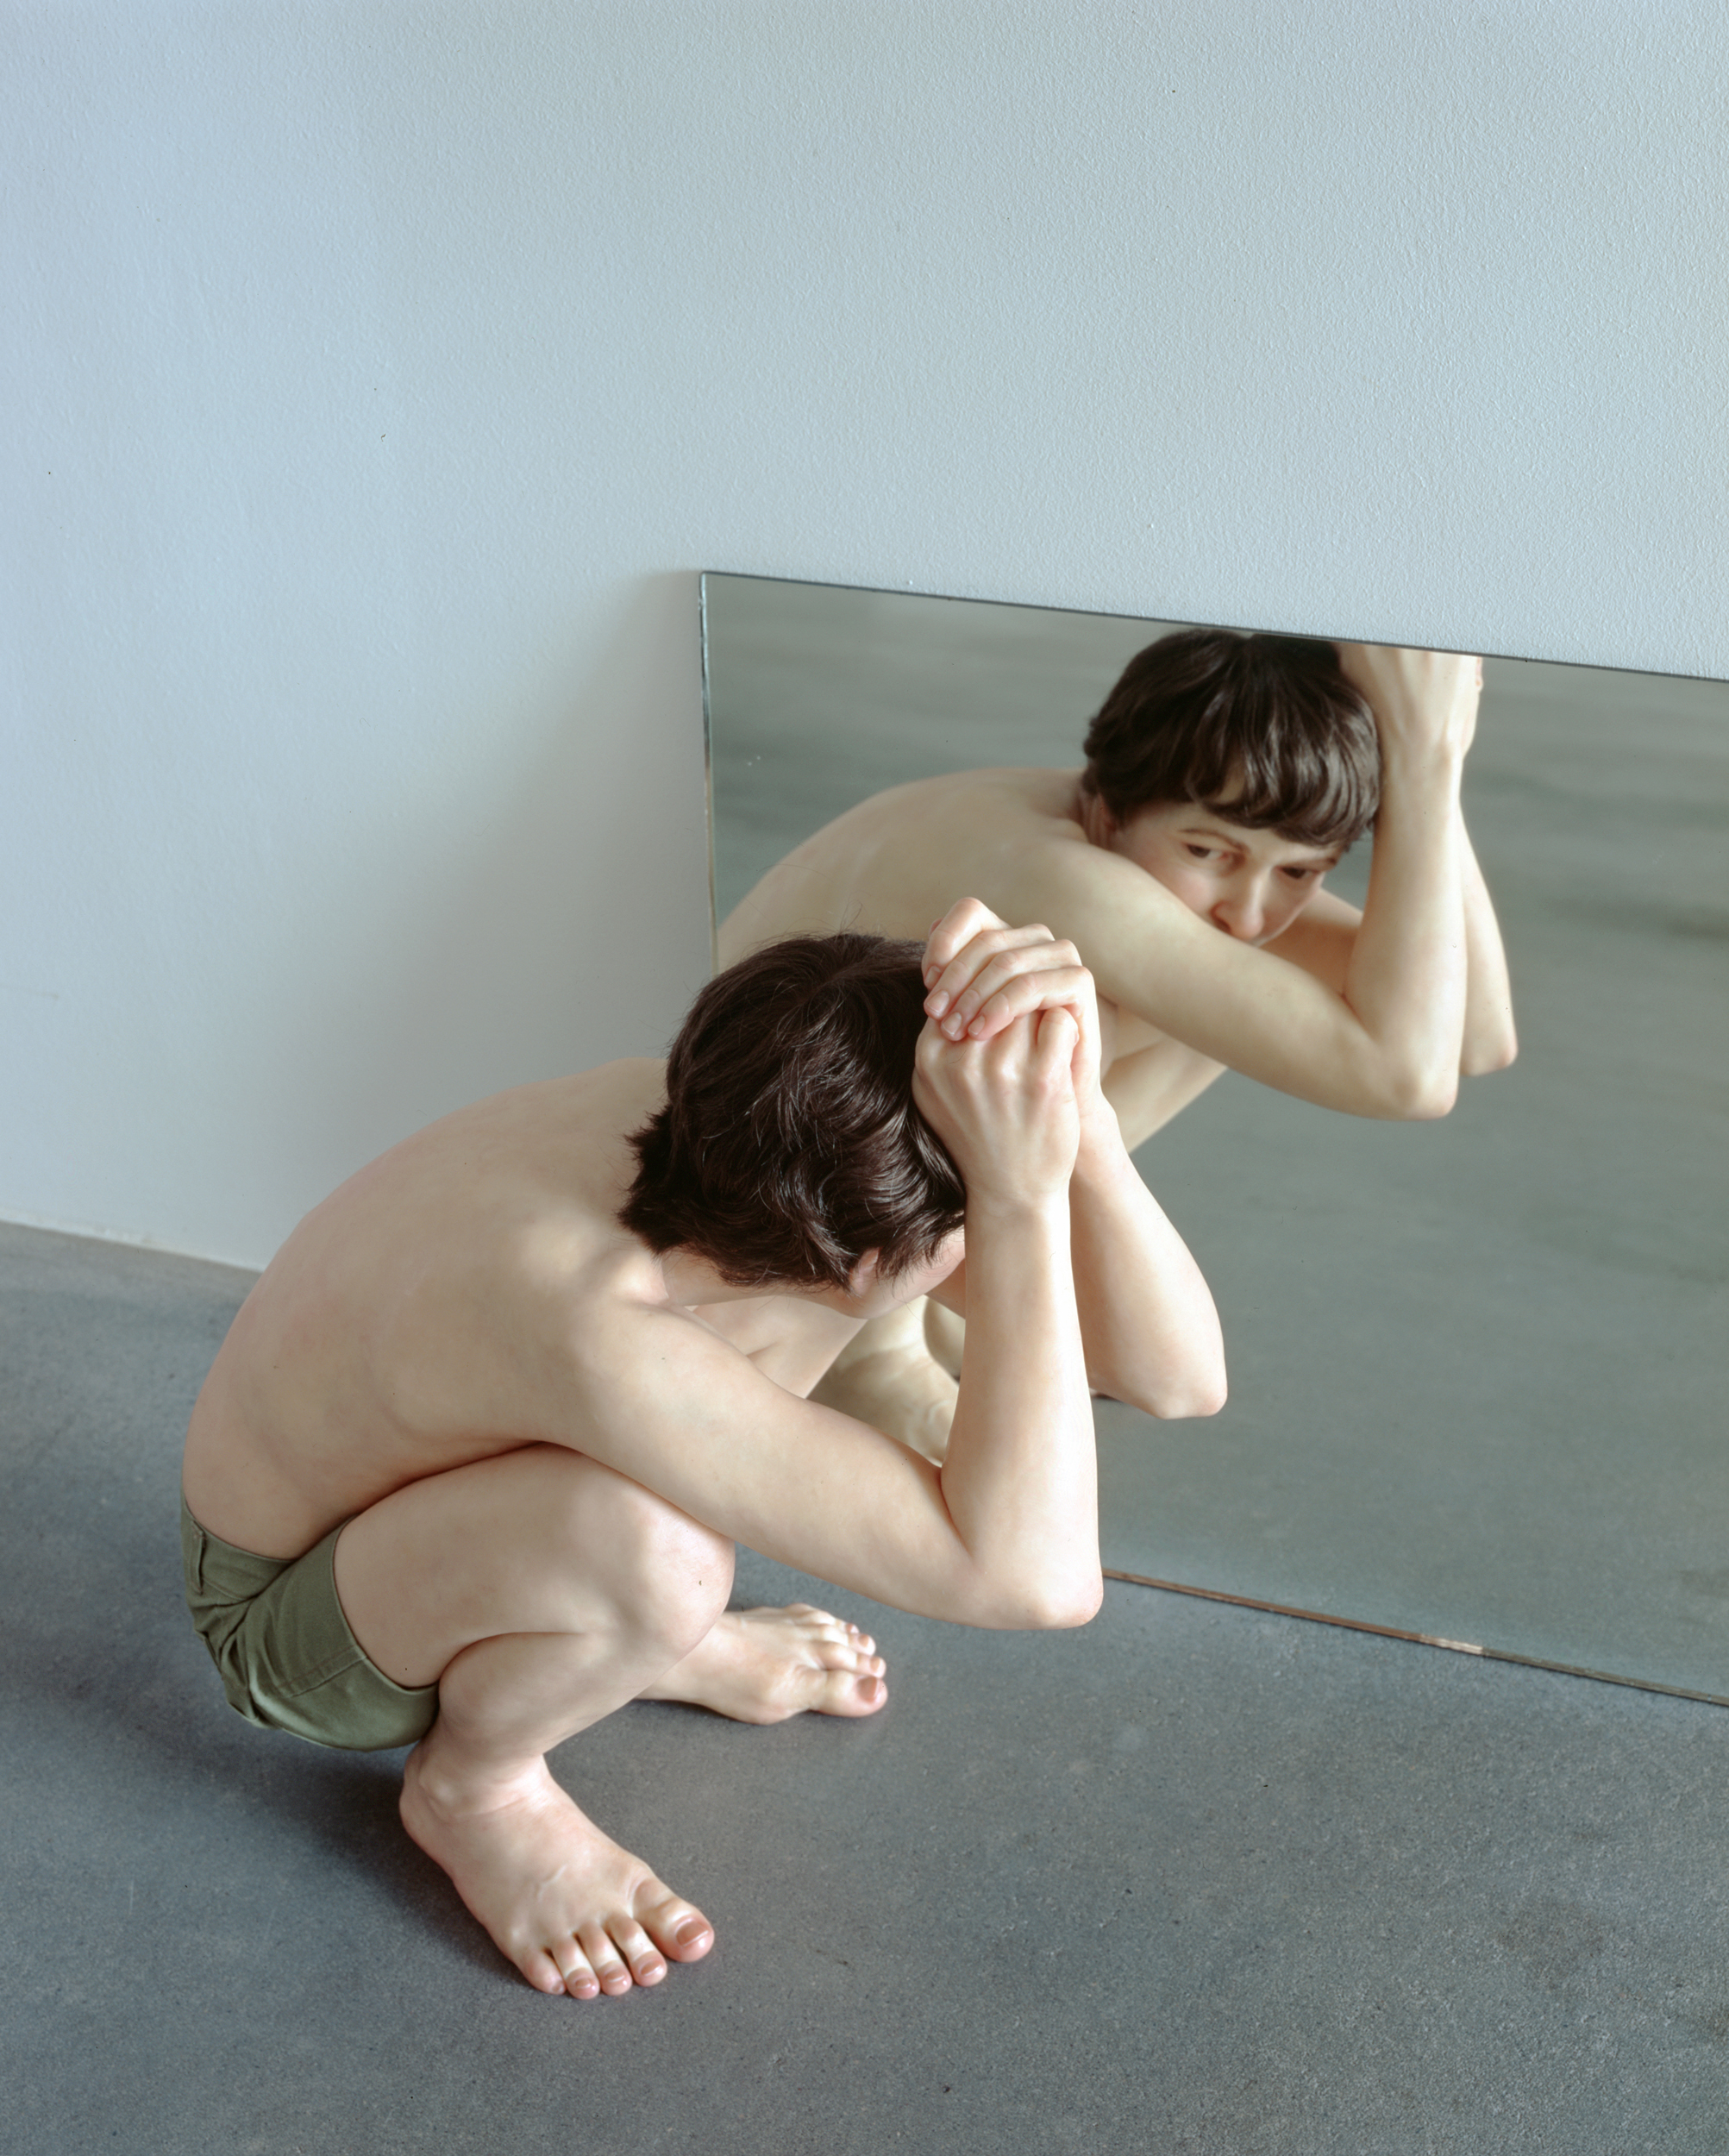 Ron Mueck - Crouching Boy in Mirror, 1999-2002, mixed media